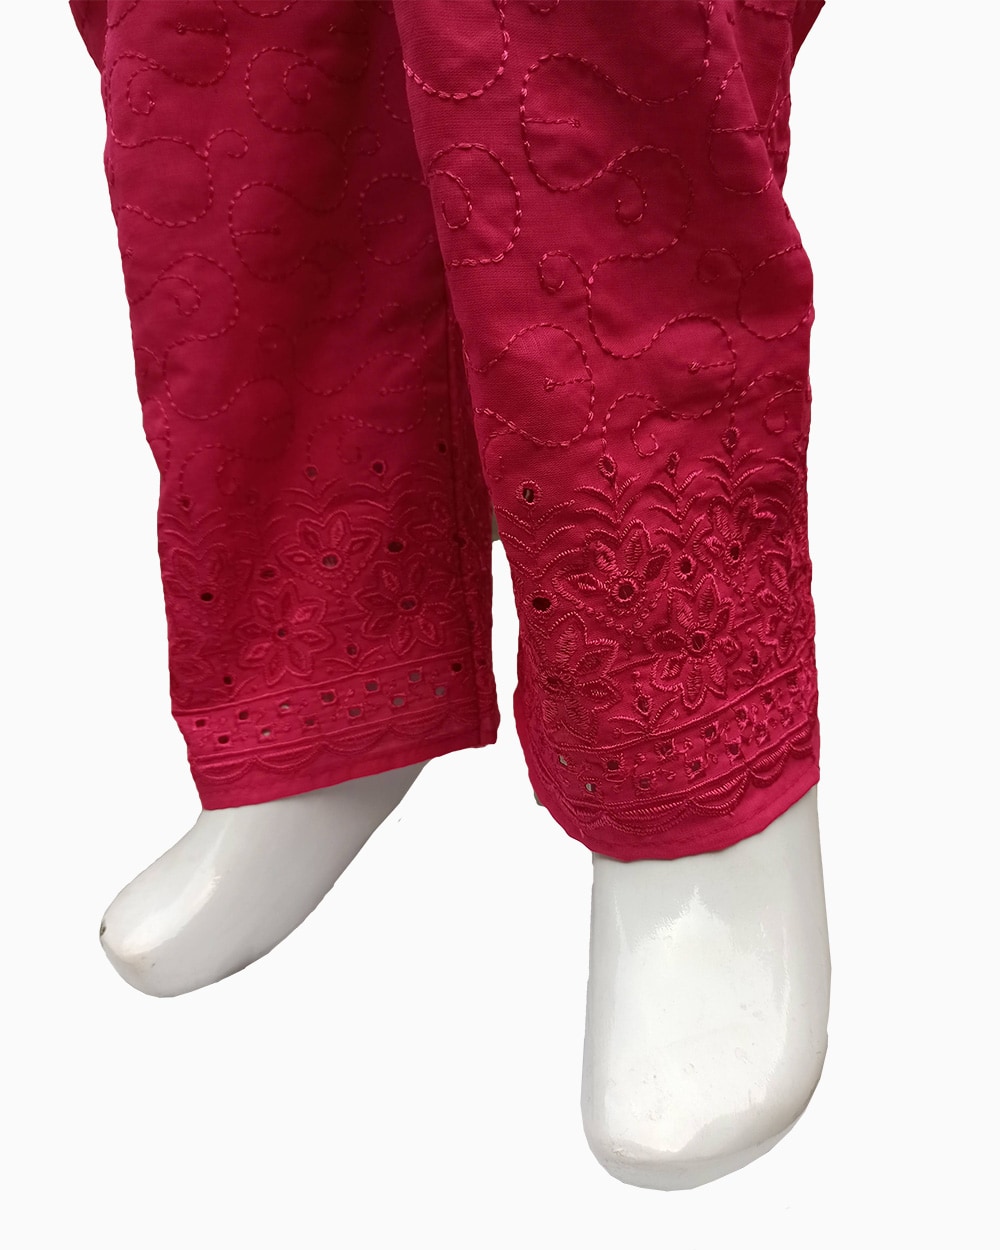 chicken karri-thread embroidery all over trousers-female shalwar-widest range of female trousers (1)-pink all over embroidery trouser